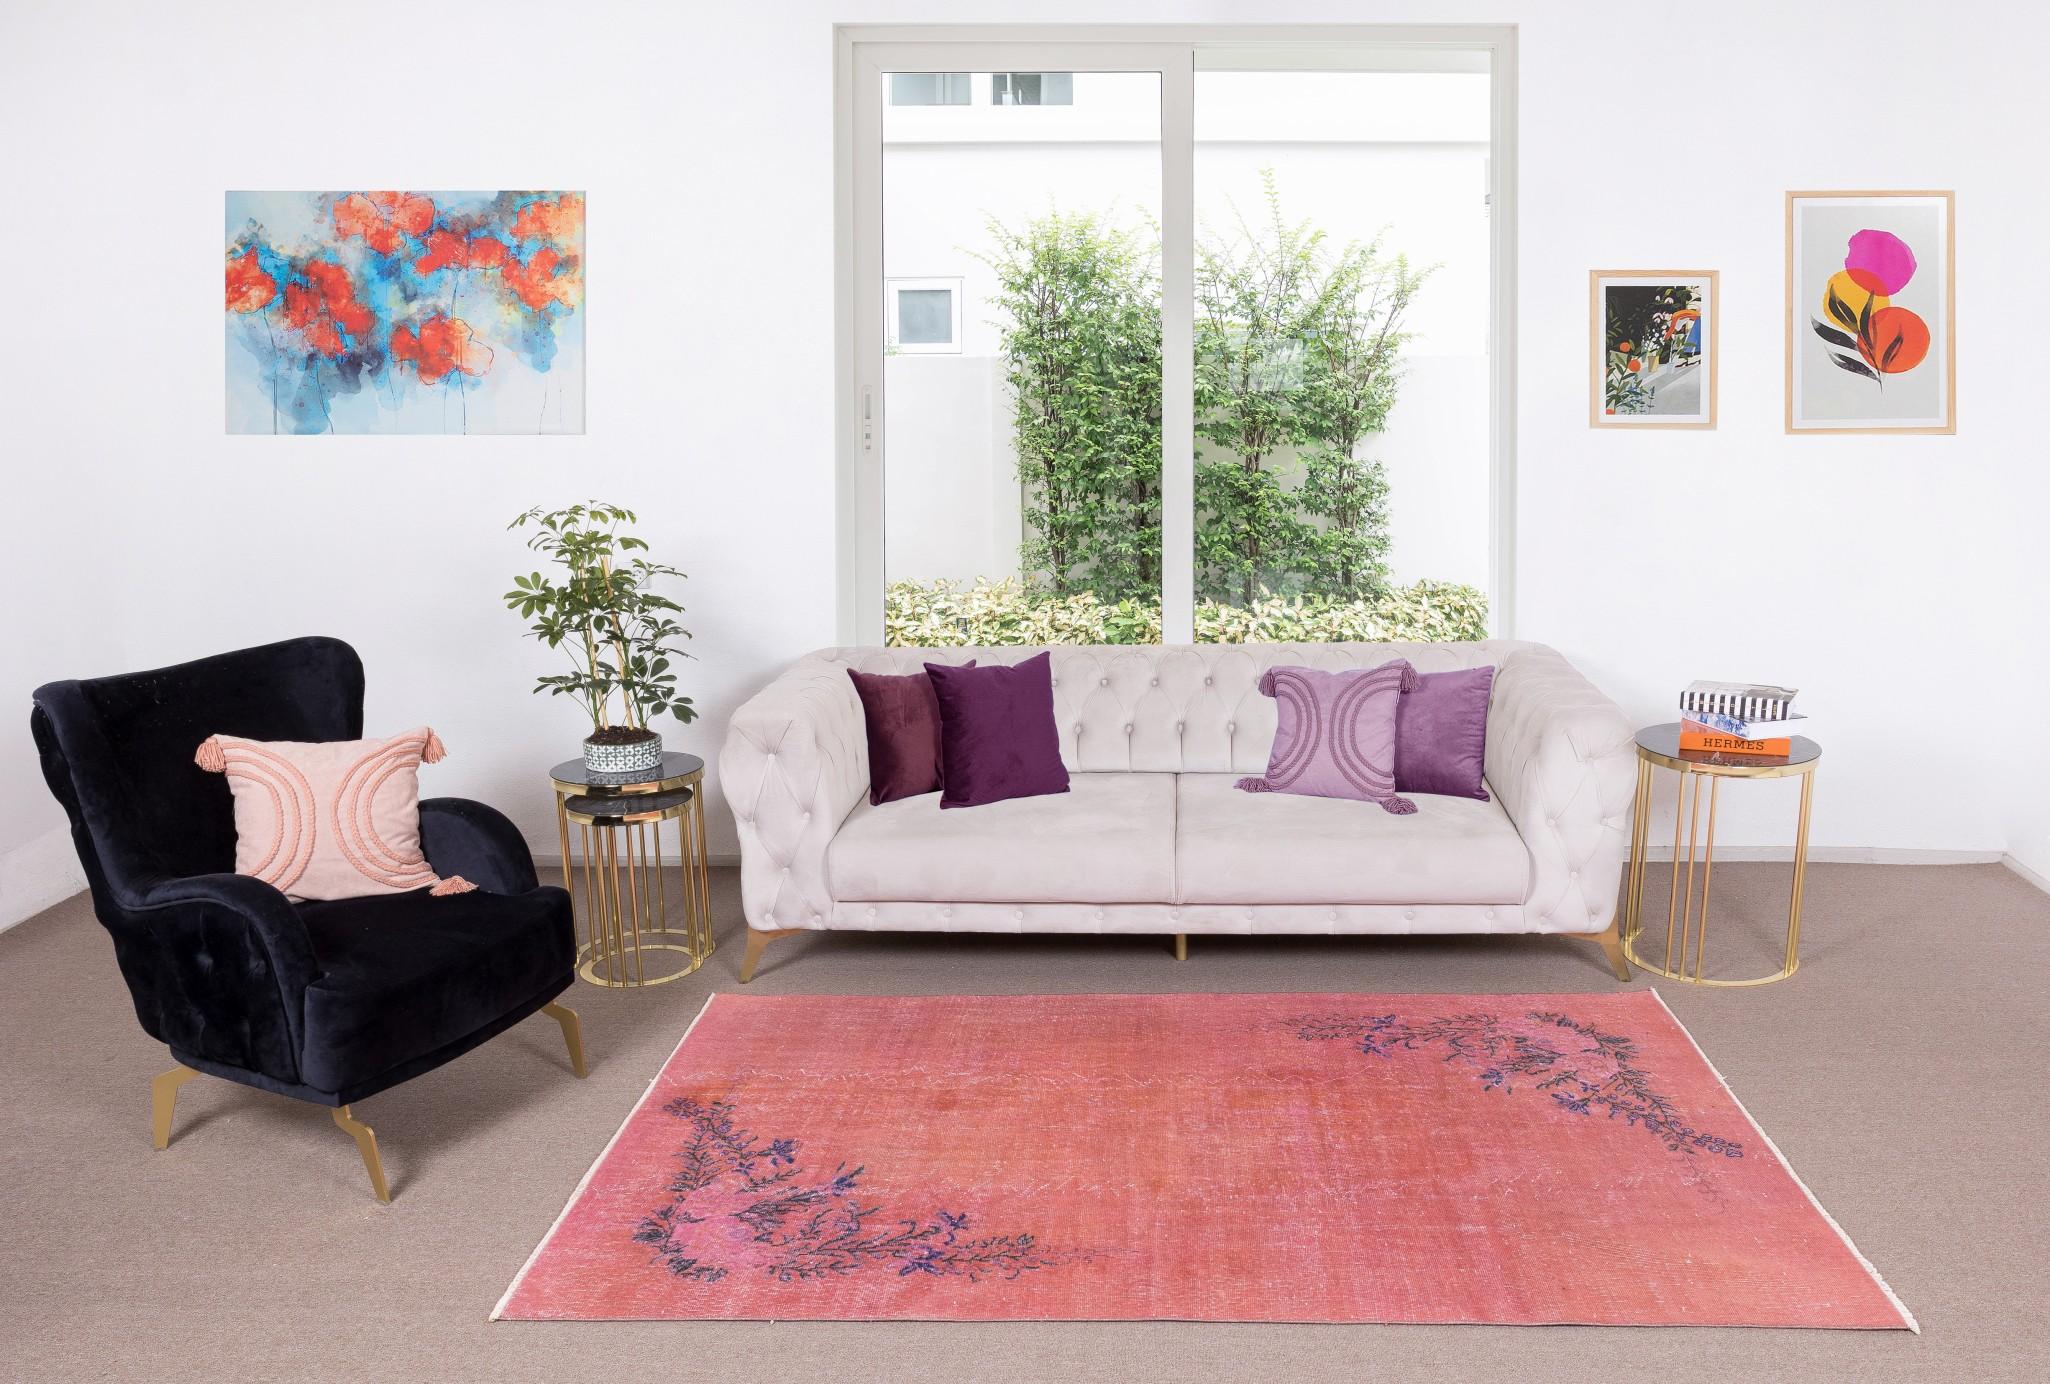 Our over-dyed rugs are all hand-knotted vintage pieces that are recreated in our workshop to cater to a wider range of interior design choices from modern to coastal, from industrial to rustic/cottage. These 50 to 70 year-old rugs were hand-knotted